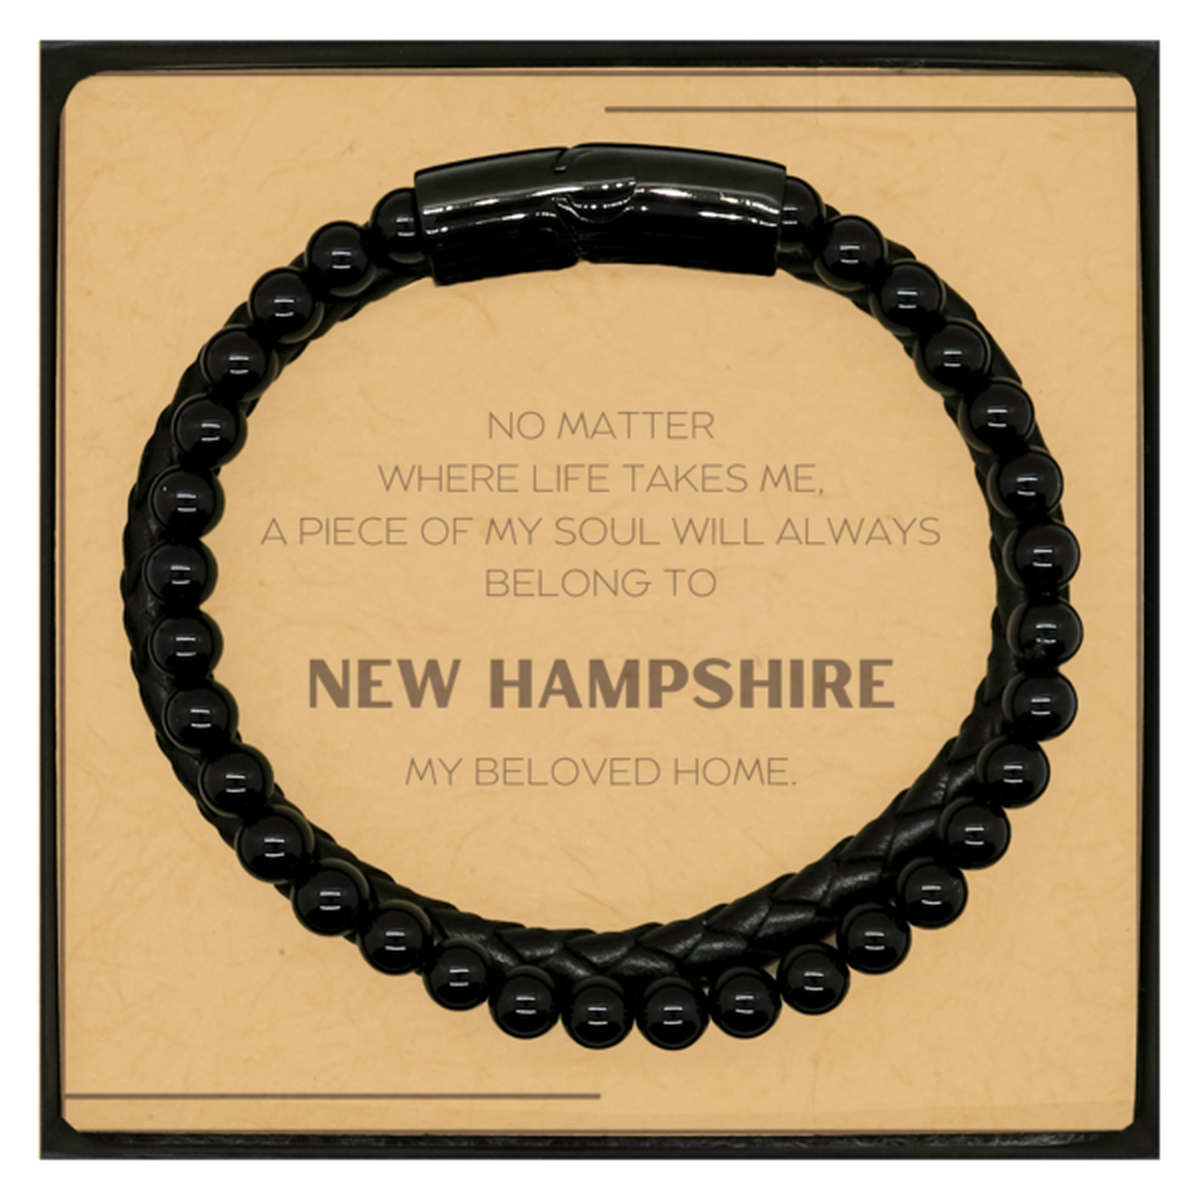 Love New Hampshire State Gifts, My soul will always belong to New Hampshire, Proud Stone Leather Bracelets, Birthday Christmas Unique Gifts For New Hampshire Men, Women, Friends